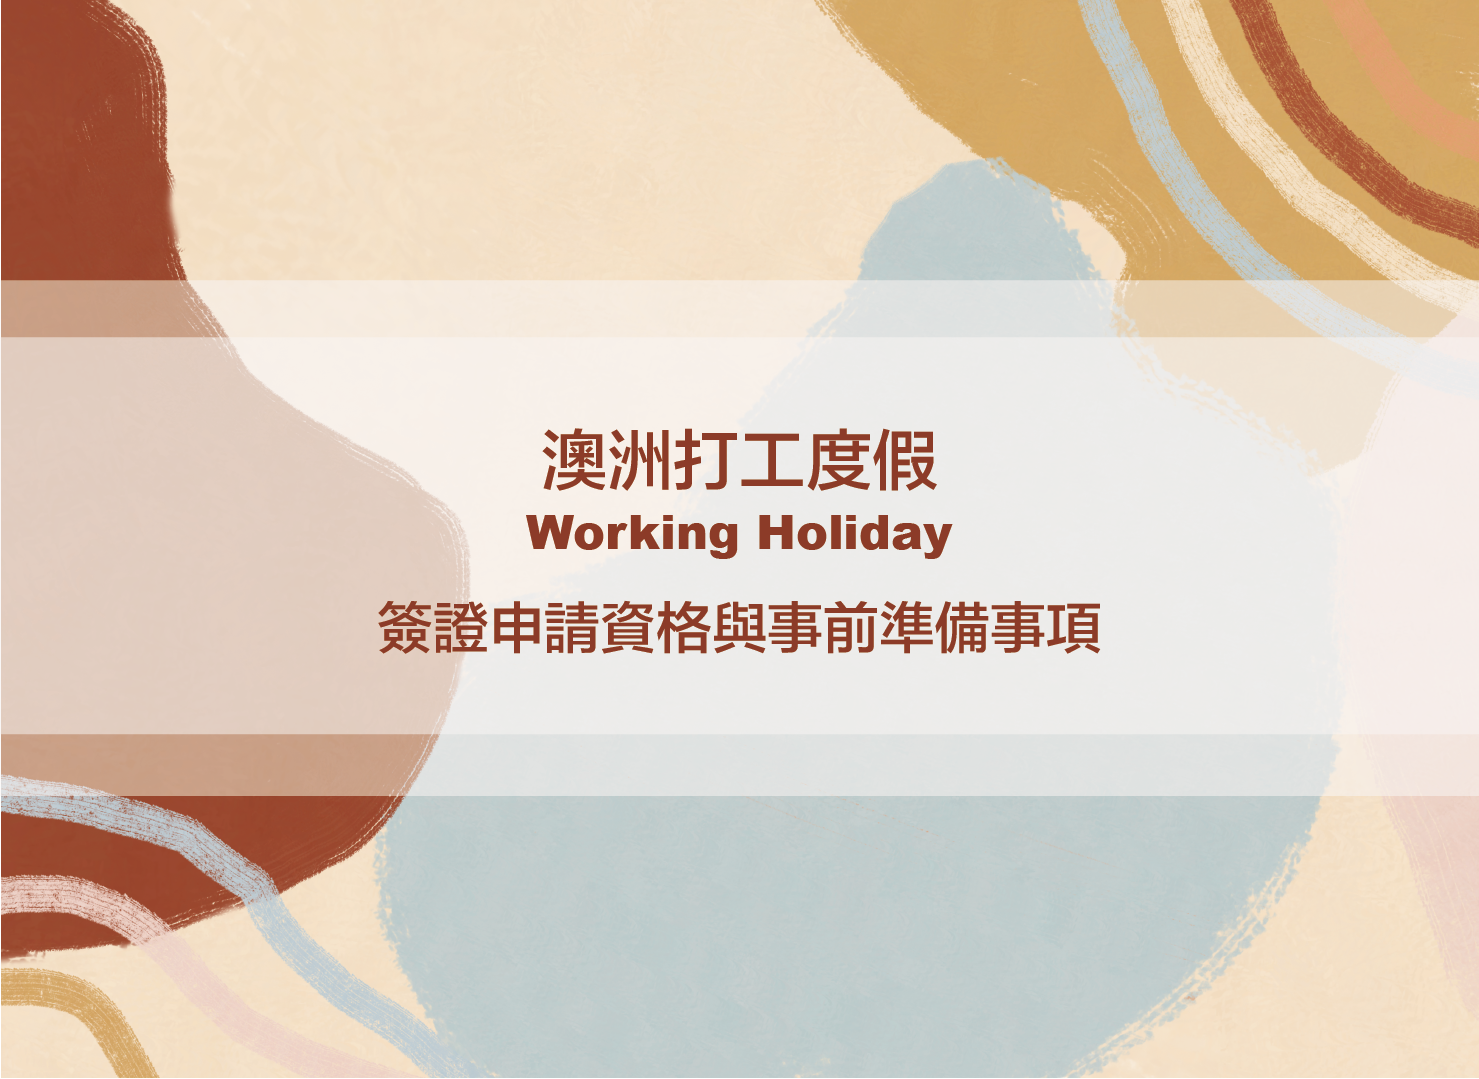 Read more about the article 澳洲打工度假｜Working Holiday 417 簽證申請資格與事前準備事項（2021最新版）